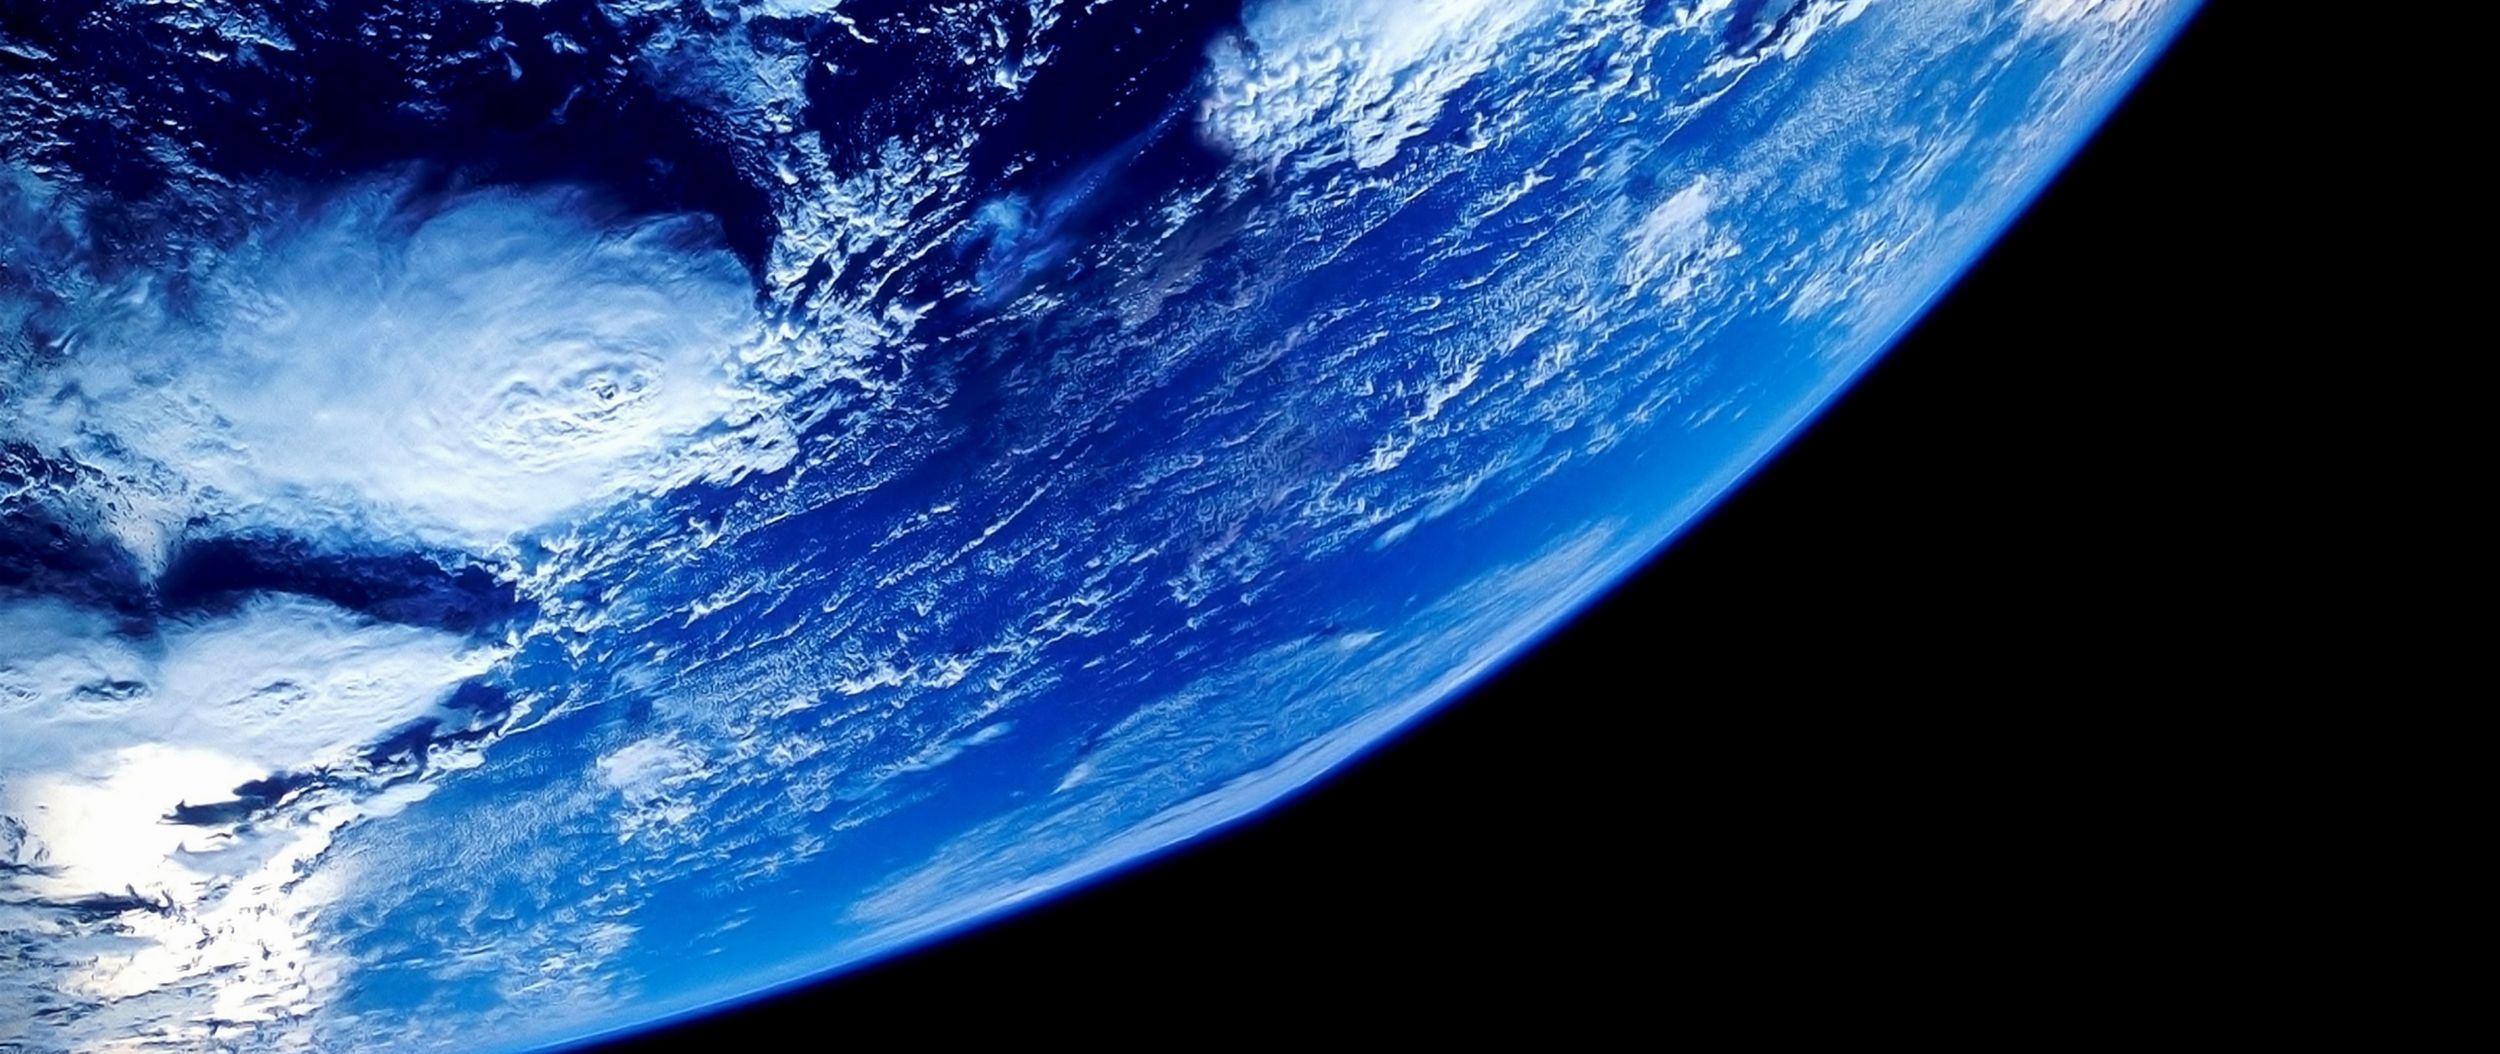 Ultrawide Wallpaper That Will Look Stunning On Screen. Wallpaper earth, Earth from space, Planets wallpaper